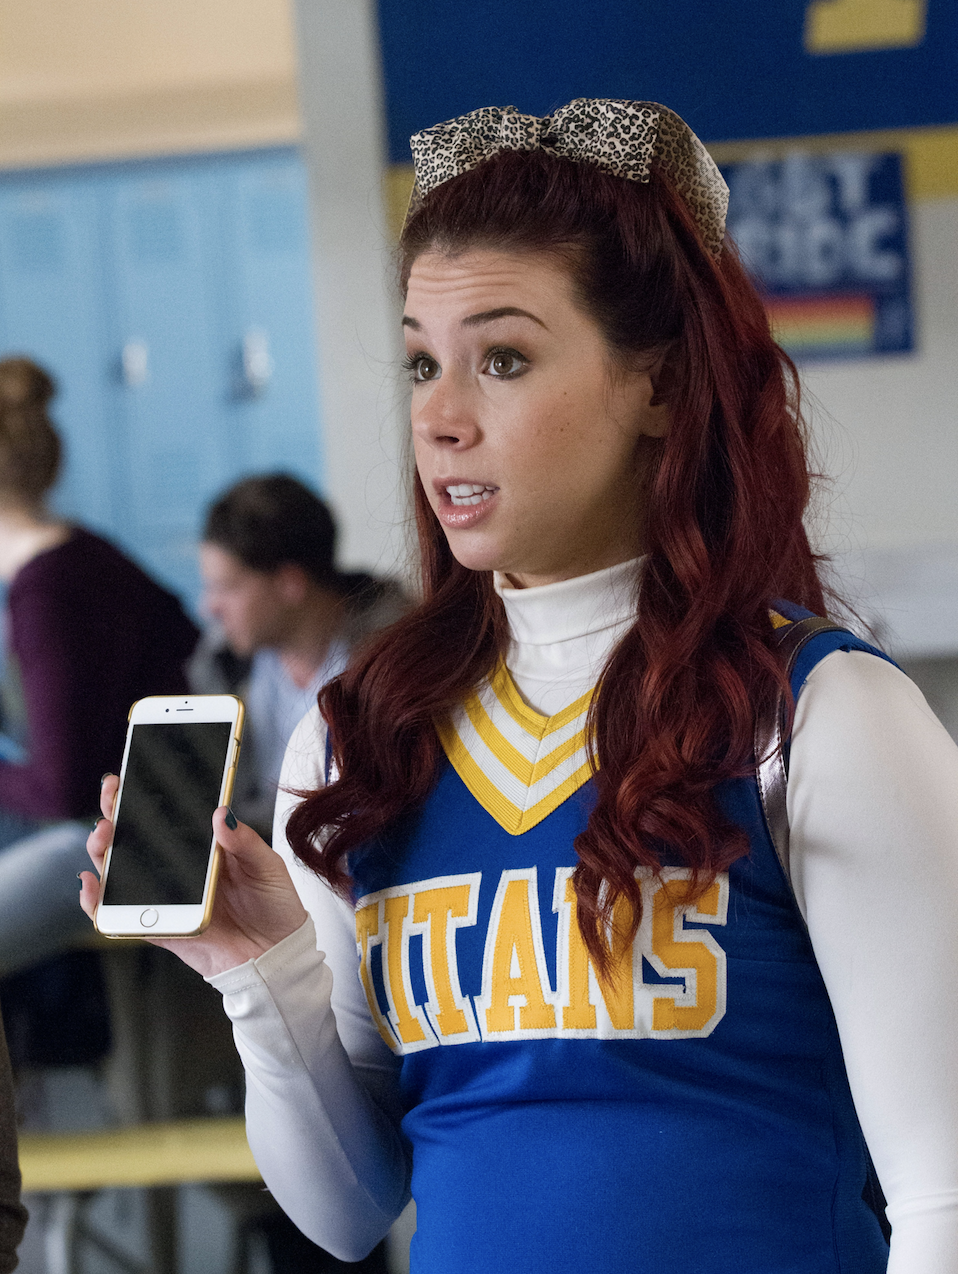 Tamara wearing a cheerleading uniform with a ribbon in her hair